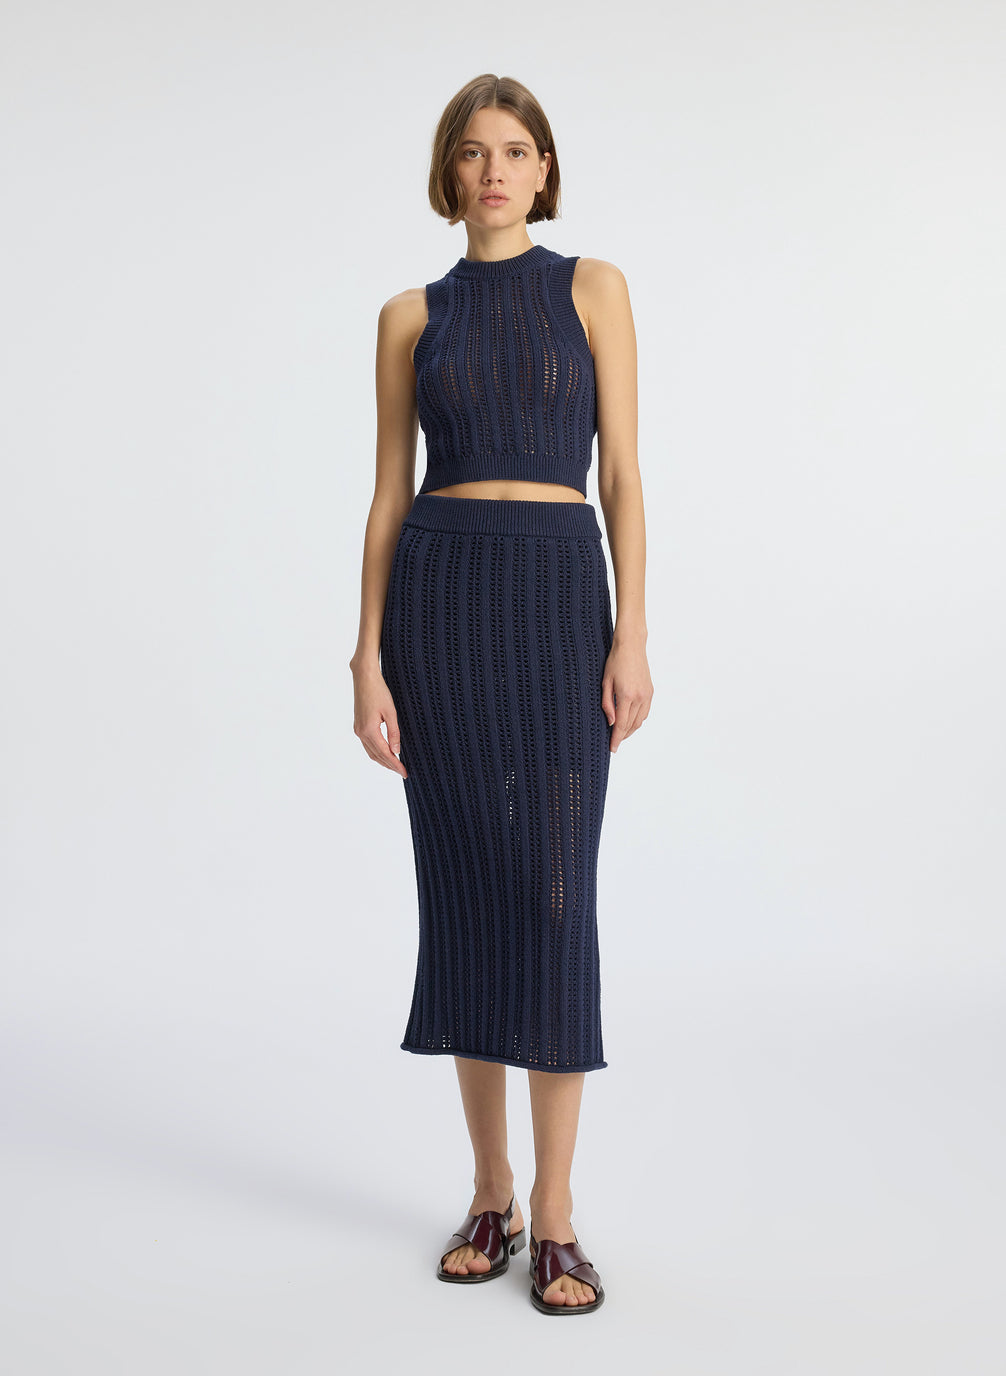 front view of woman wearing navy blue open weave tank top and matching skirt